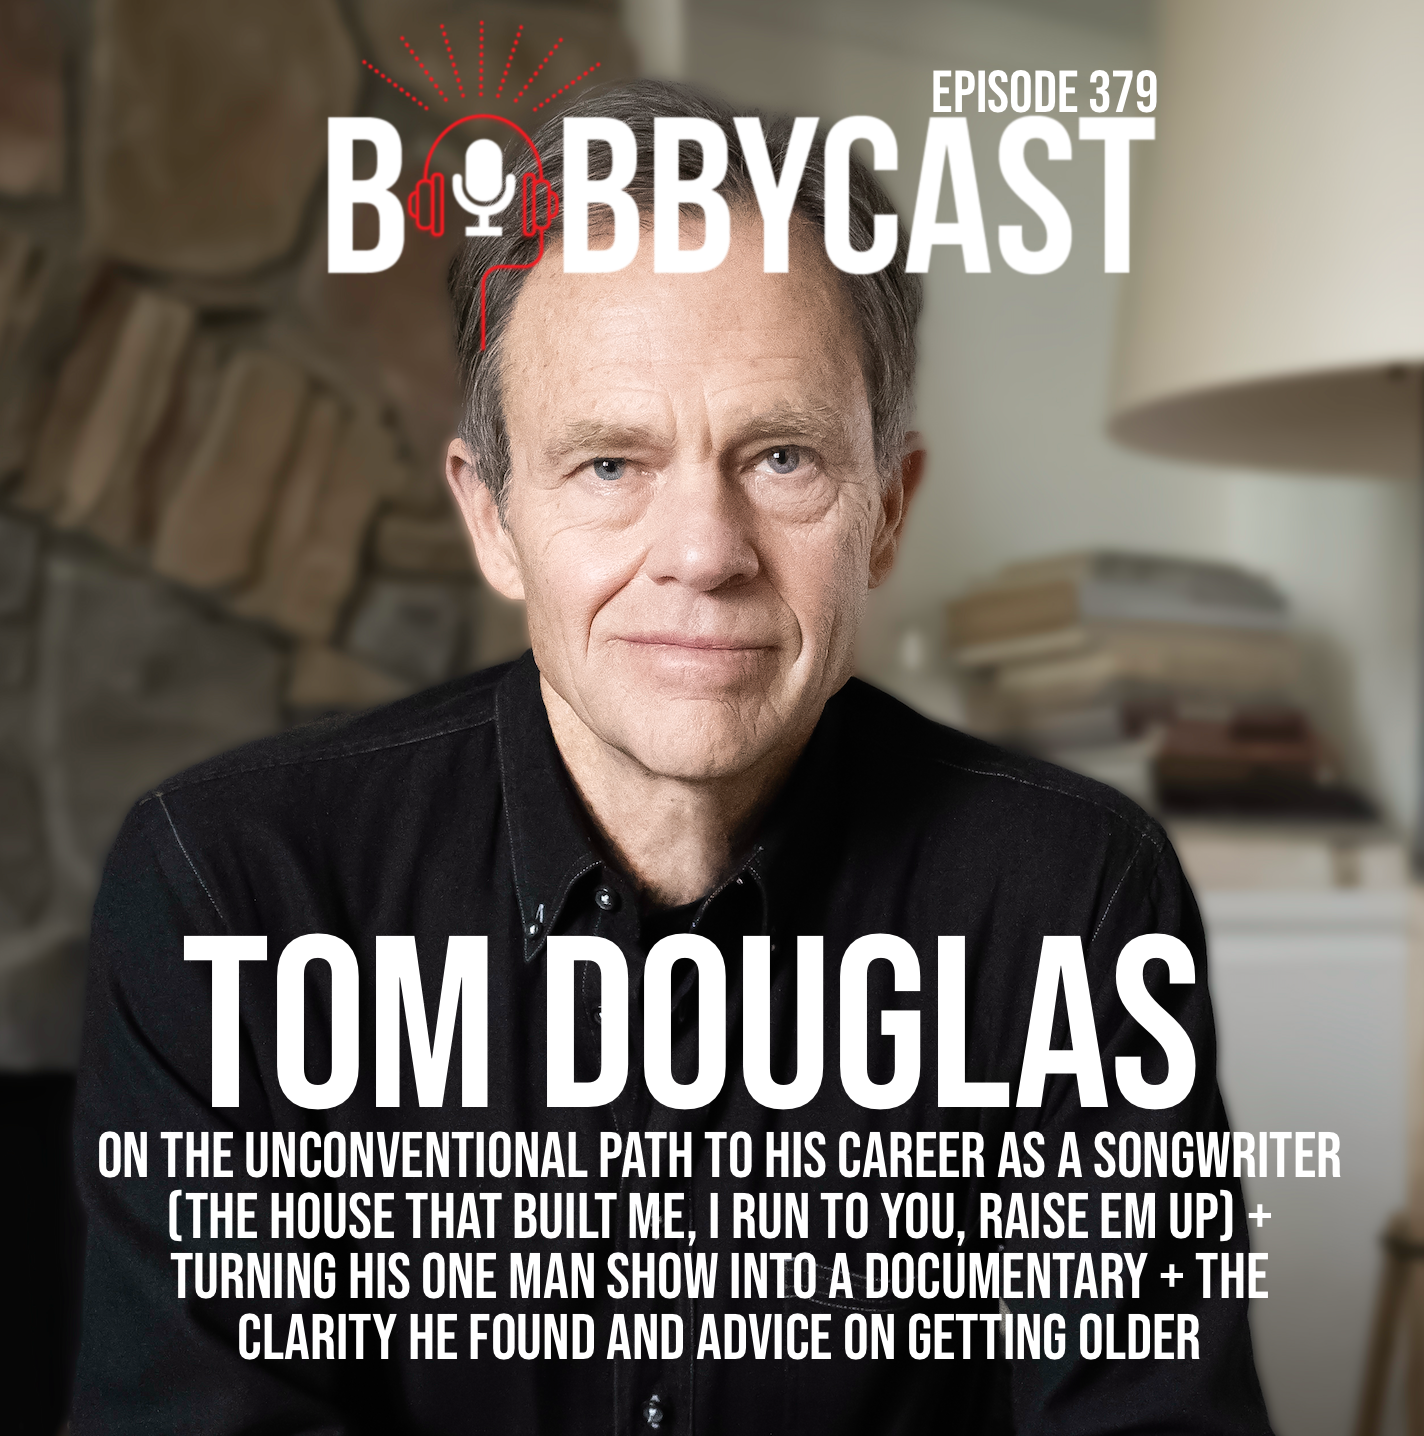 #379 - Tom Douglas on The Unconventional Path to His Career as a Songwriter (The House That Built Me, I Run to You, Raise Em Up) + Turning His One Man Show into a Documentary + The Clarity He Found An